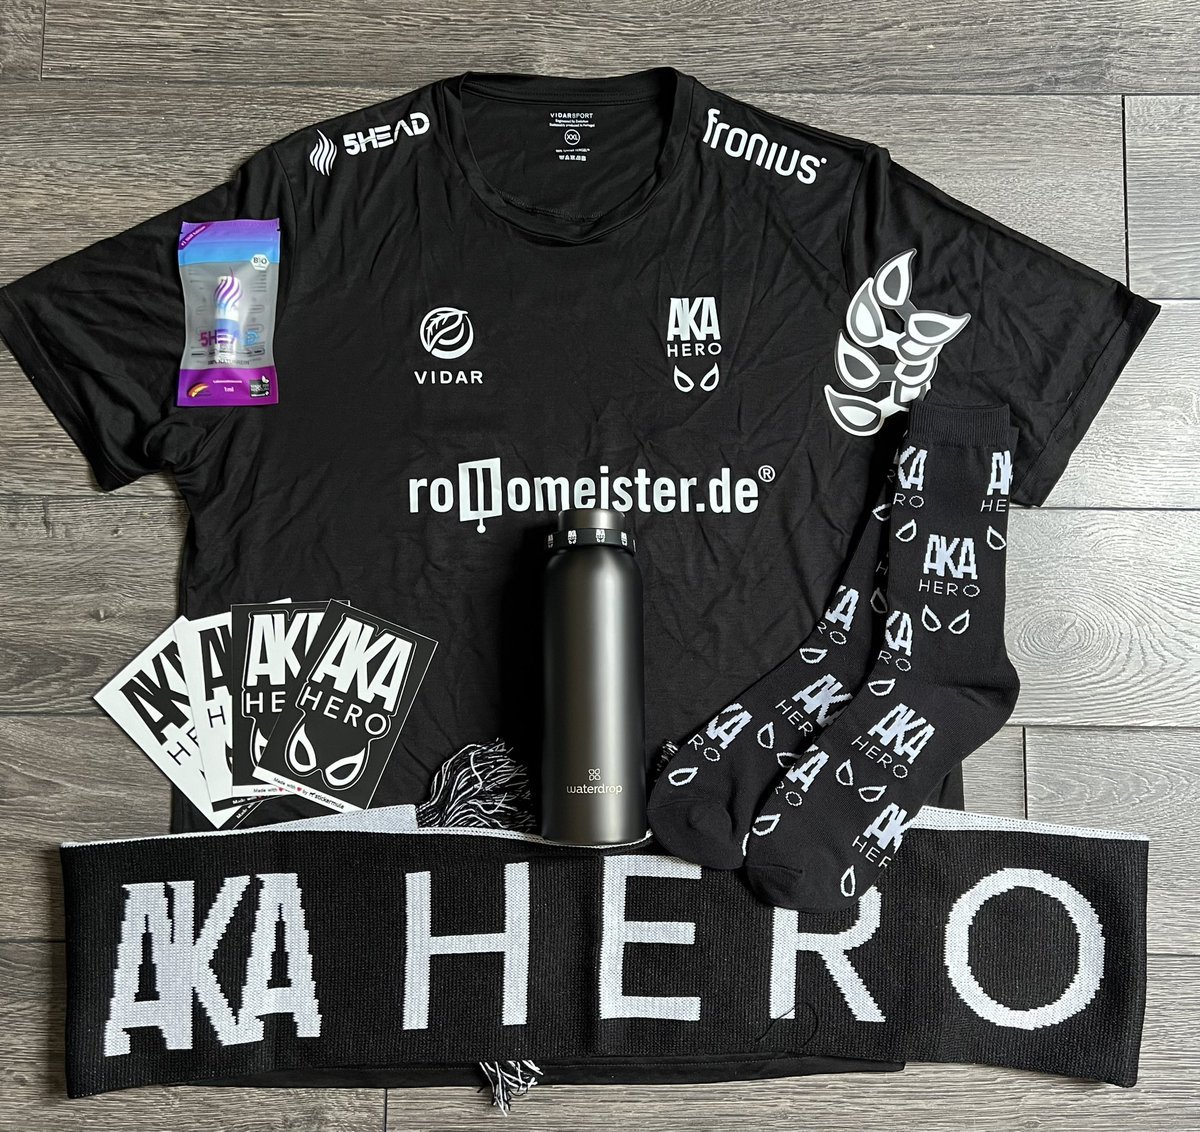 Much love to @AKAHEROESPORT for the invite to the Media Day in Frankfurt this weekend! <3